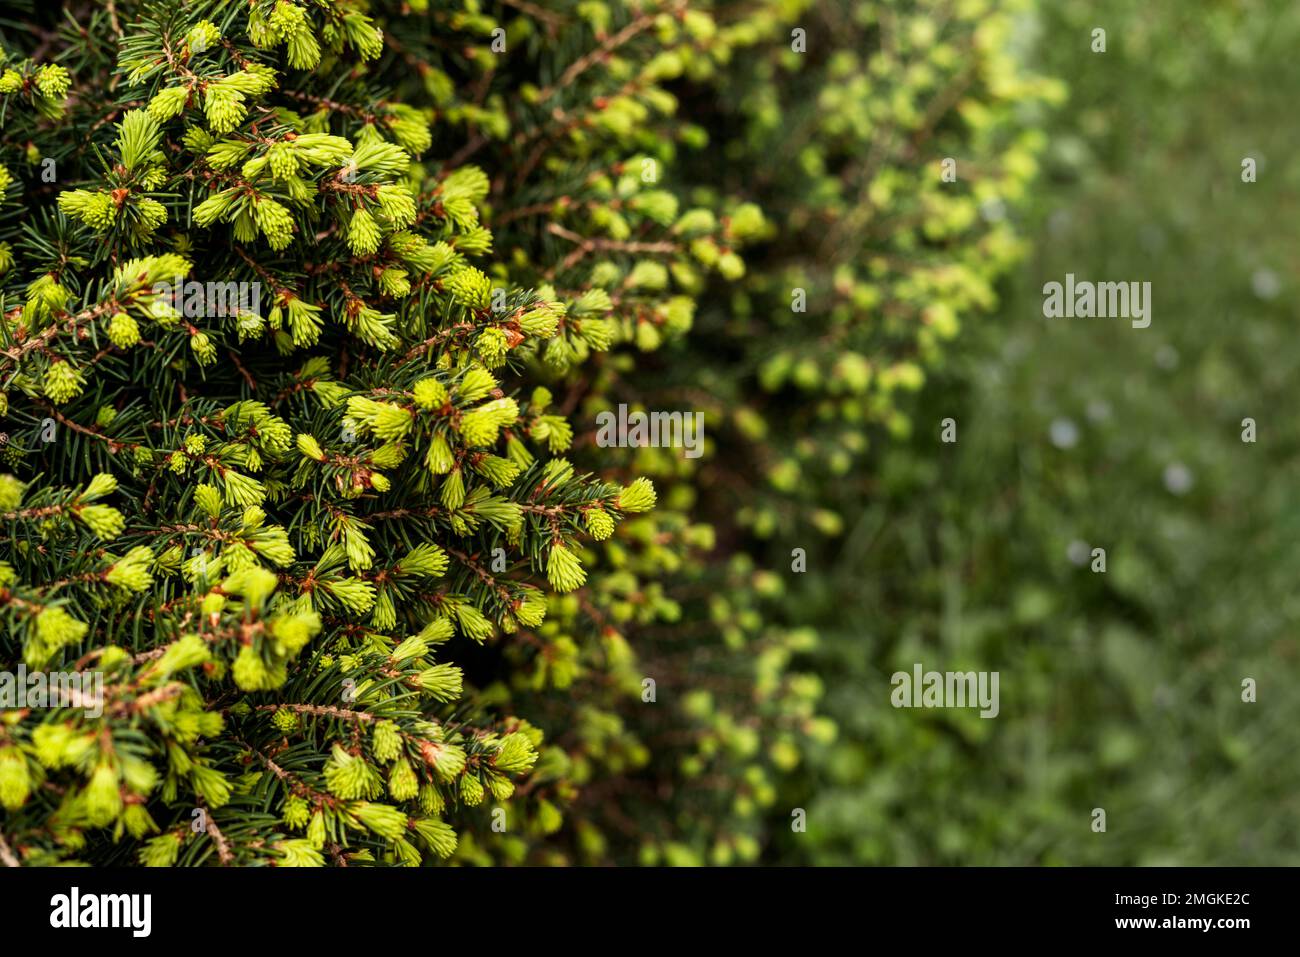 plant green background with branches of a coniferous tree with young spring bunches of needles close-up Spruce, larch or cedar copy space Botanical ga Stock Photo